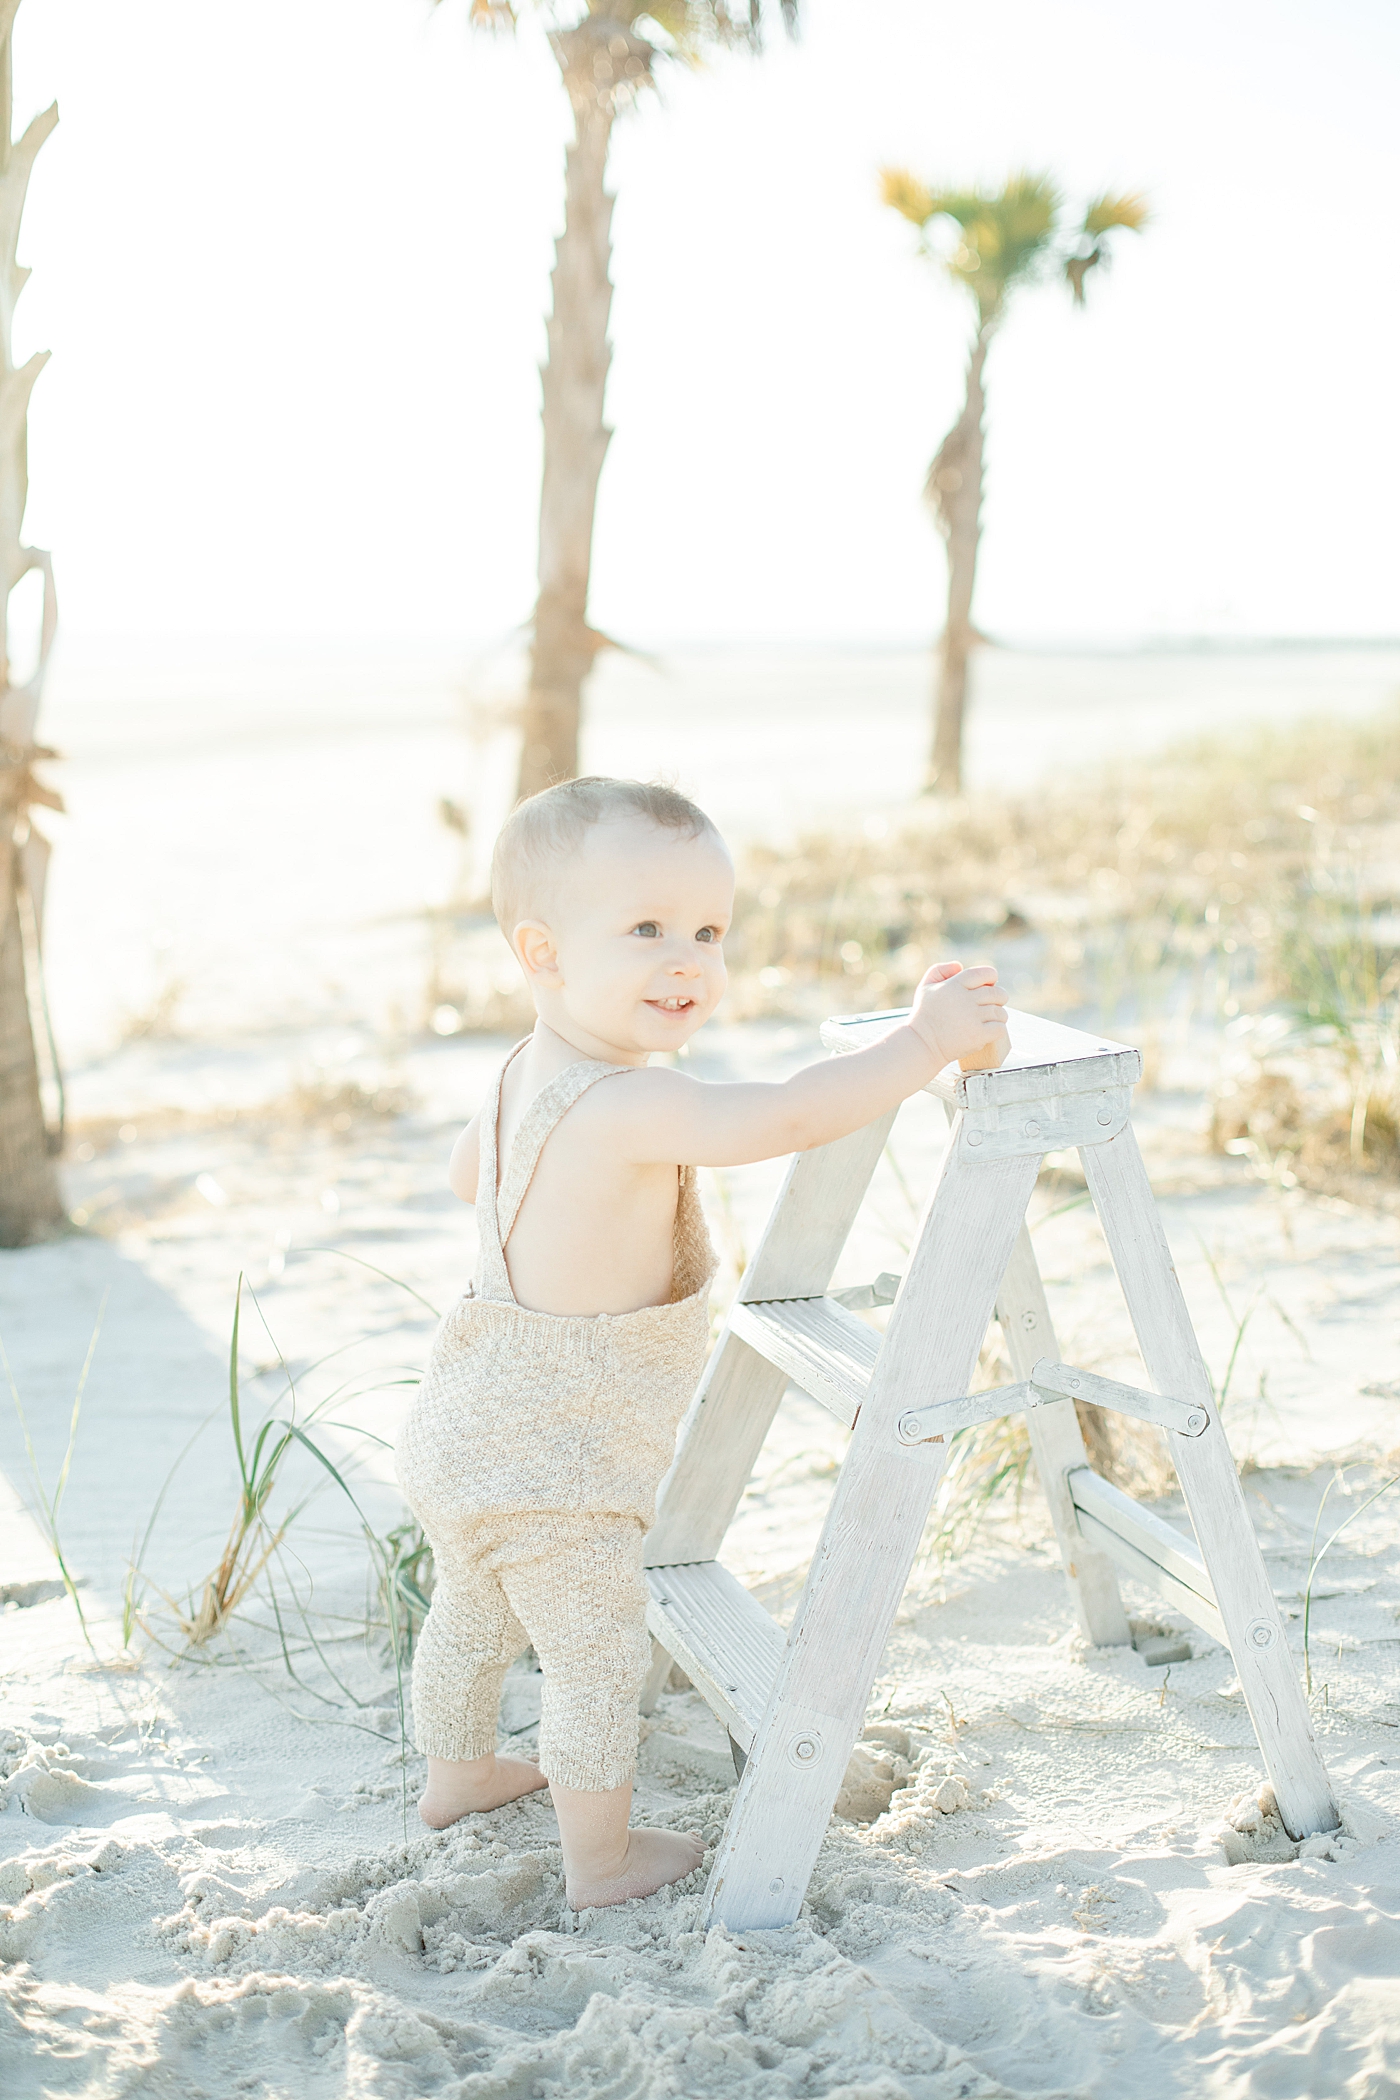  Baby boy standing on the beach with white ladder | Photo by Ocean Springs Family Photographer Little Sunshine Photography